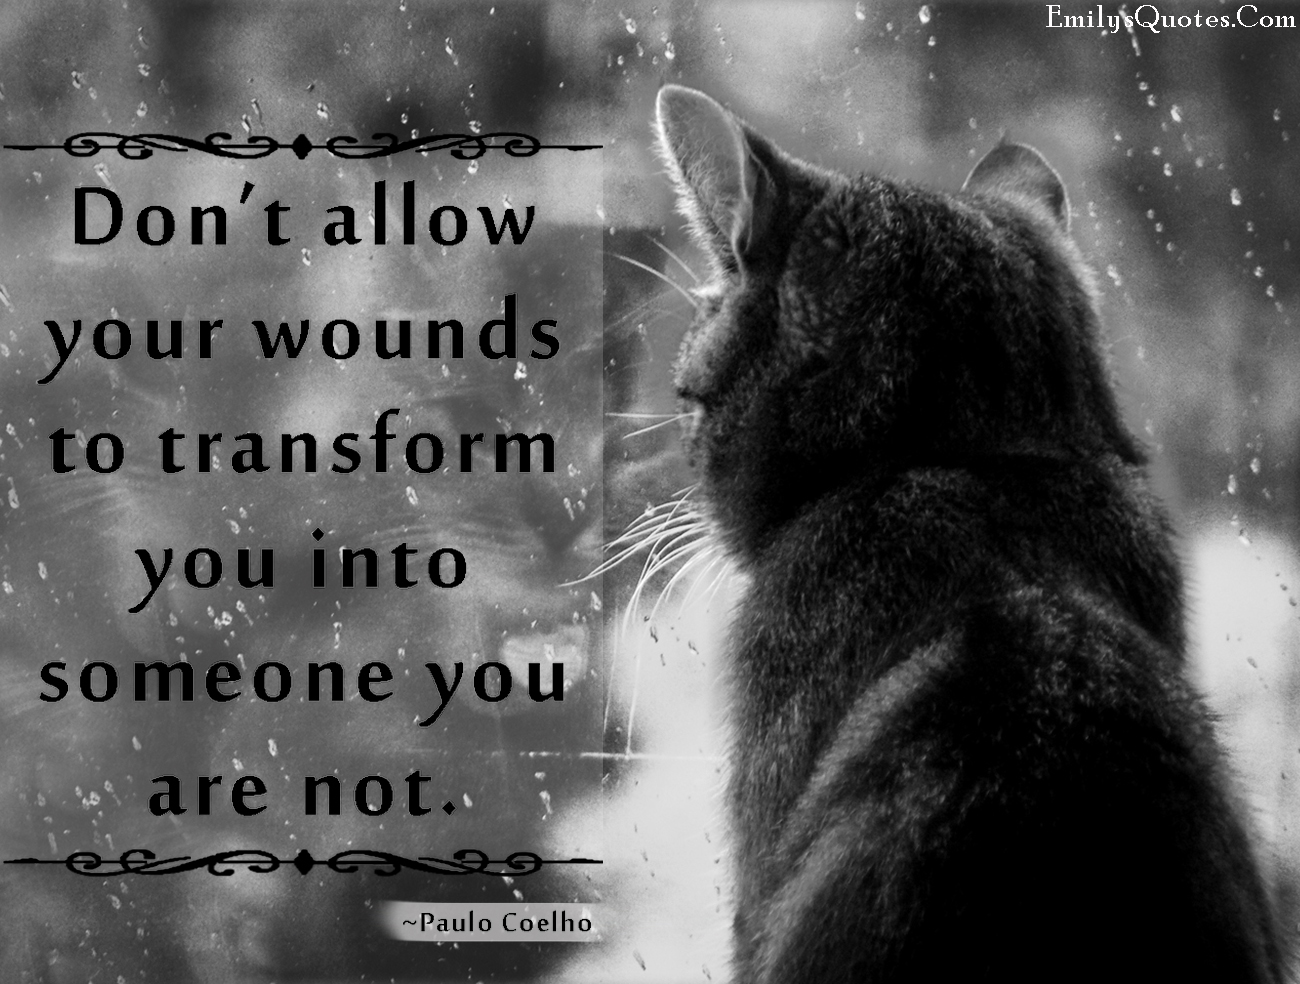 Don t allow your wounds to transform you into someone you are not